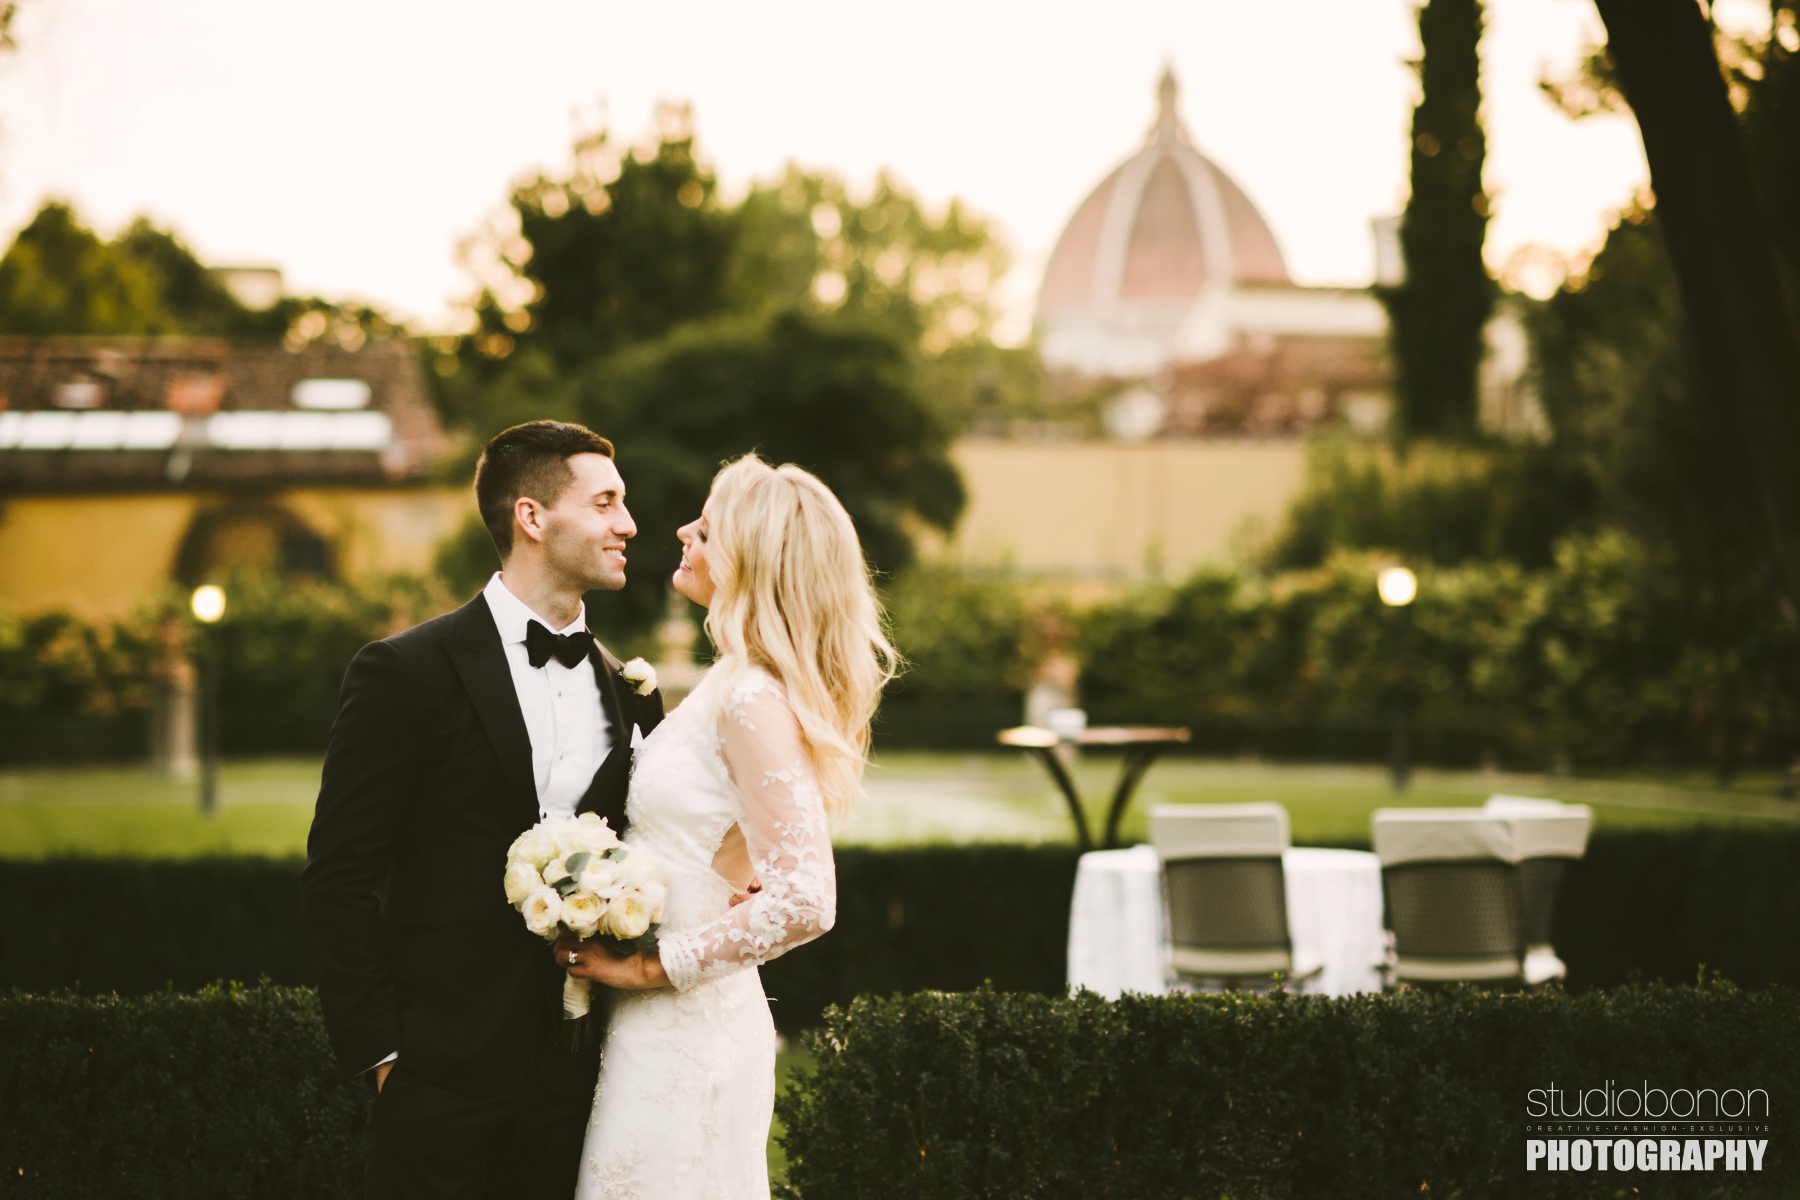 Elegant wedding photo with beautiful bride Amy and stunning groom Adrian with Florence Dome in the background